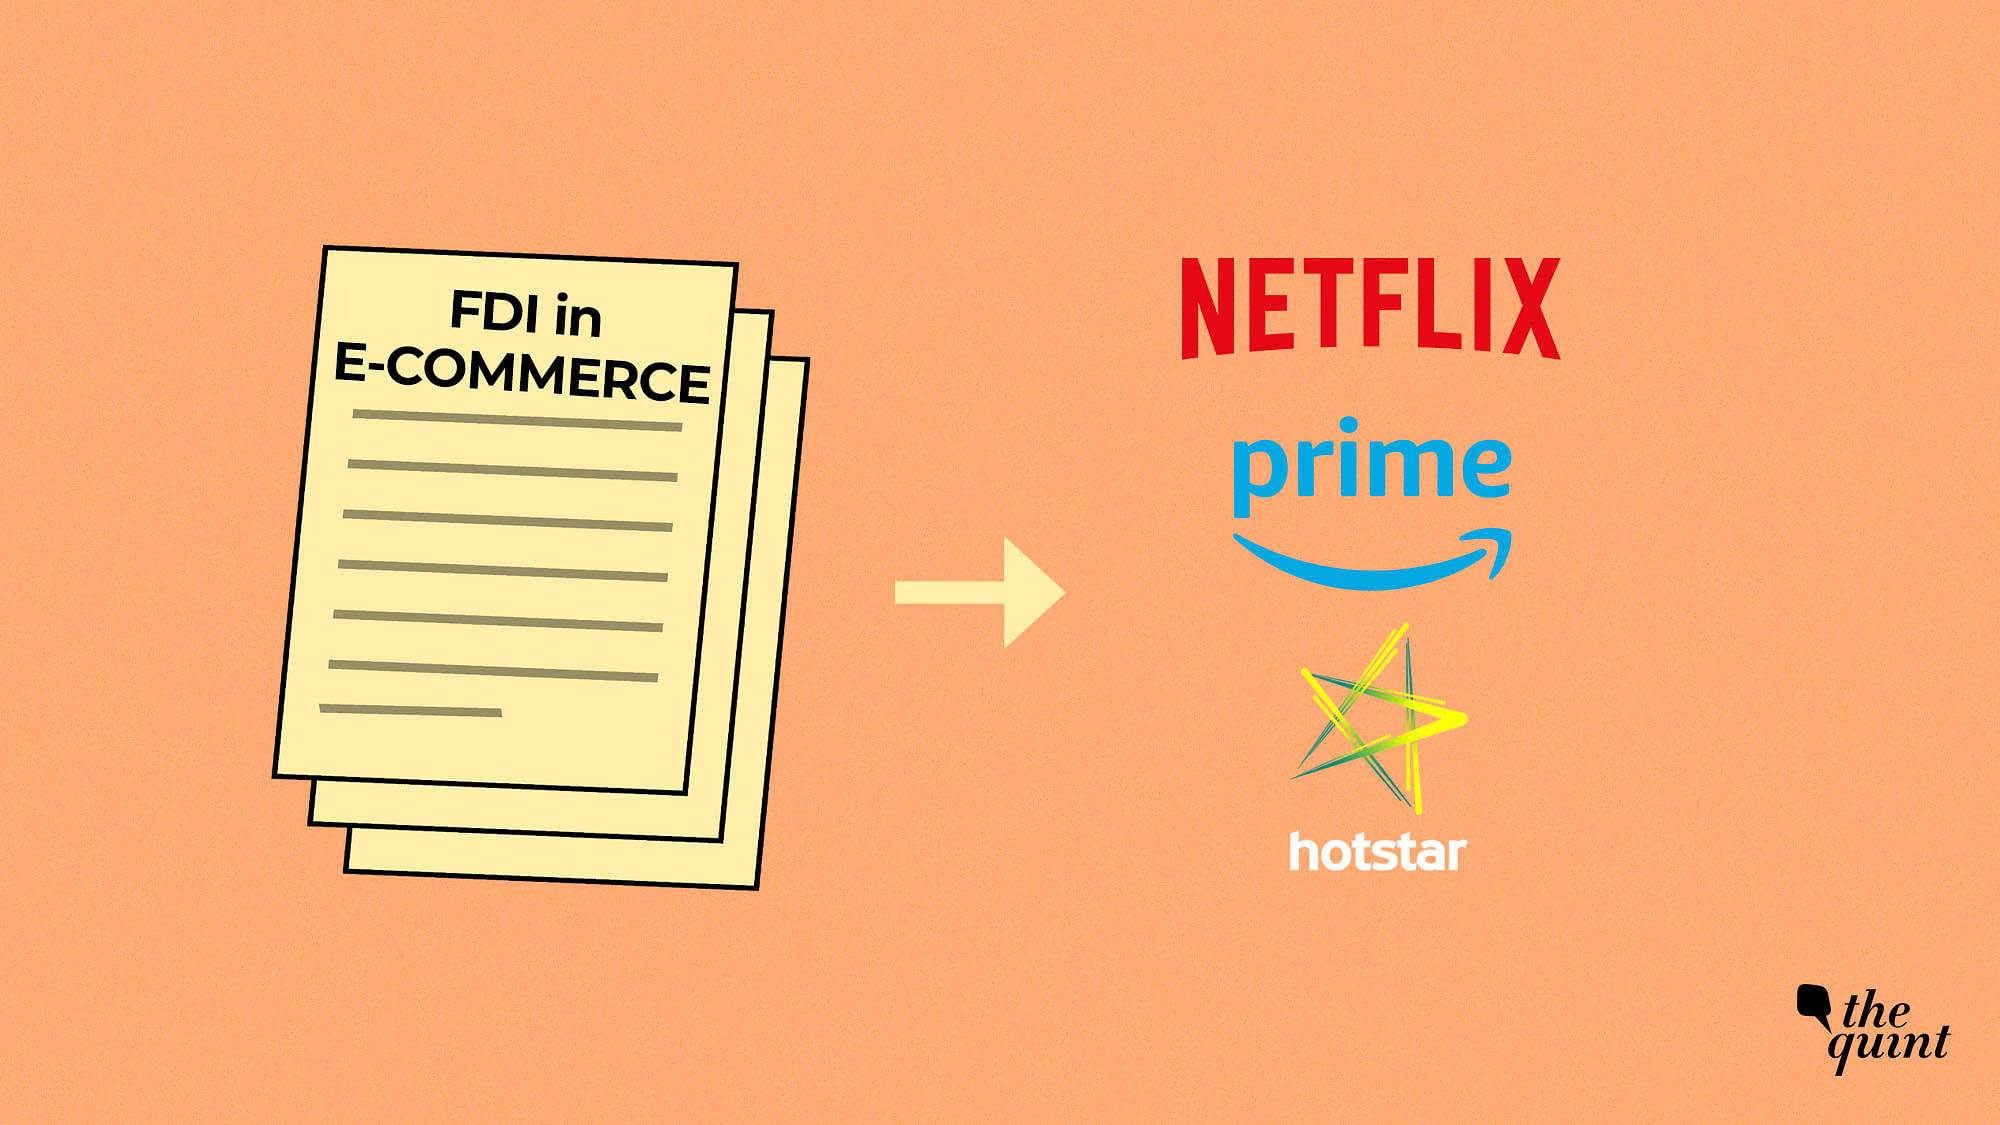 Netflix and other digital video streaming services could inadvertently fall under the new e-commerce rules on FDI.